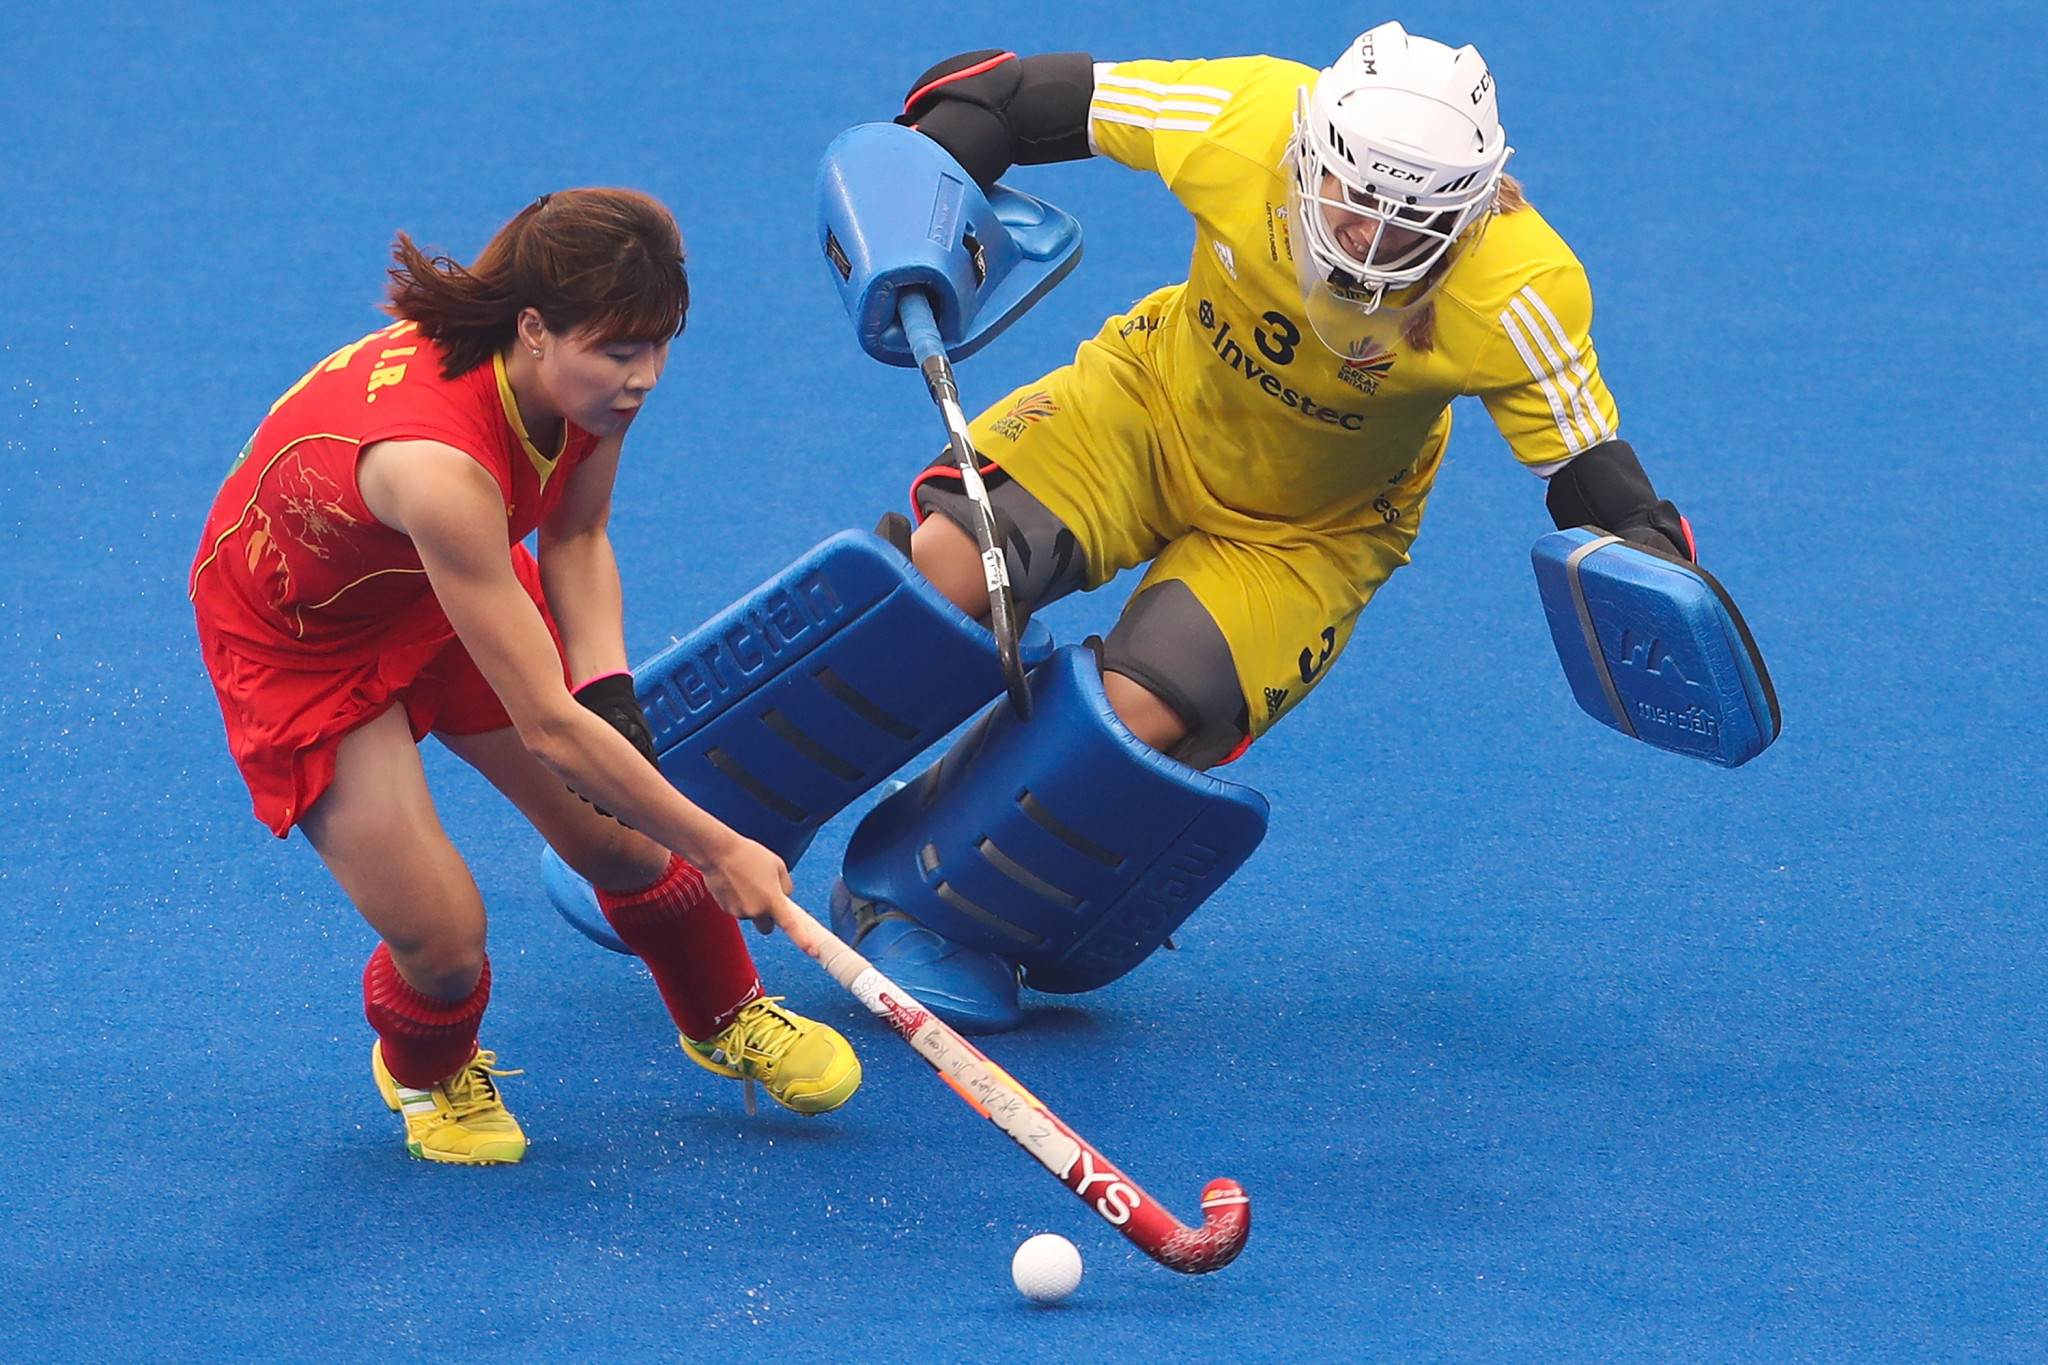 Britain beat China in a shoot-out to claim their first points in the FIH Pro League ©Getty Images